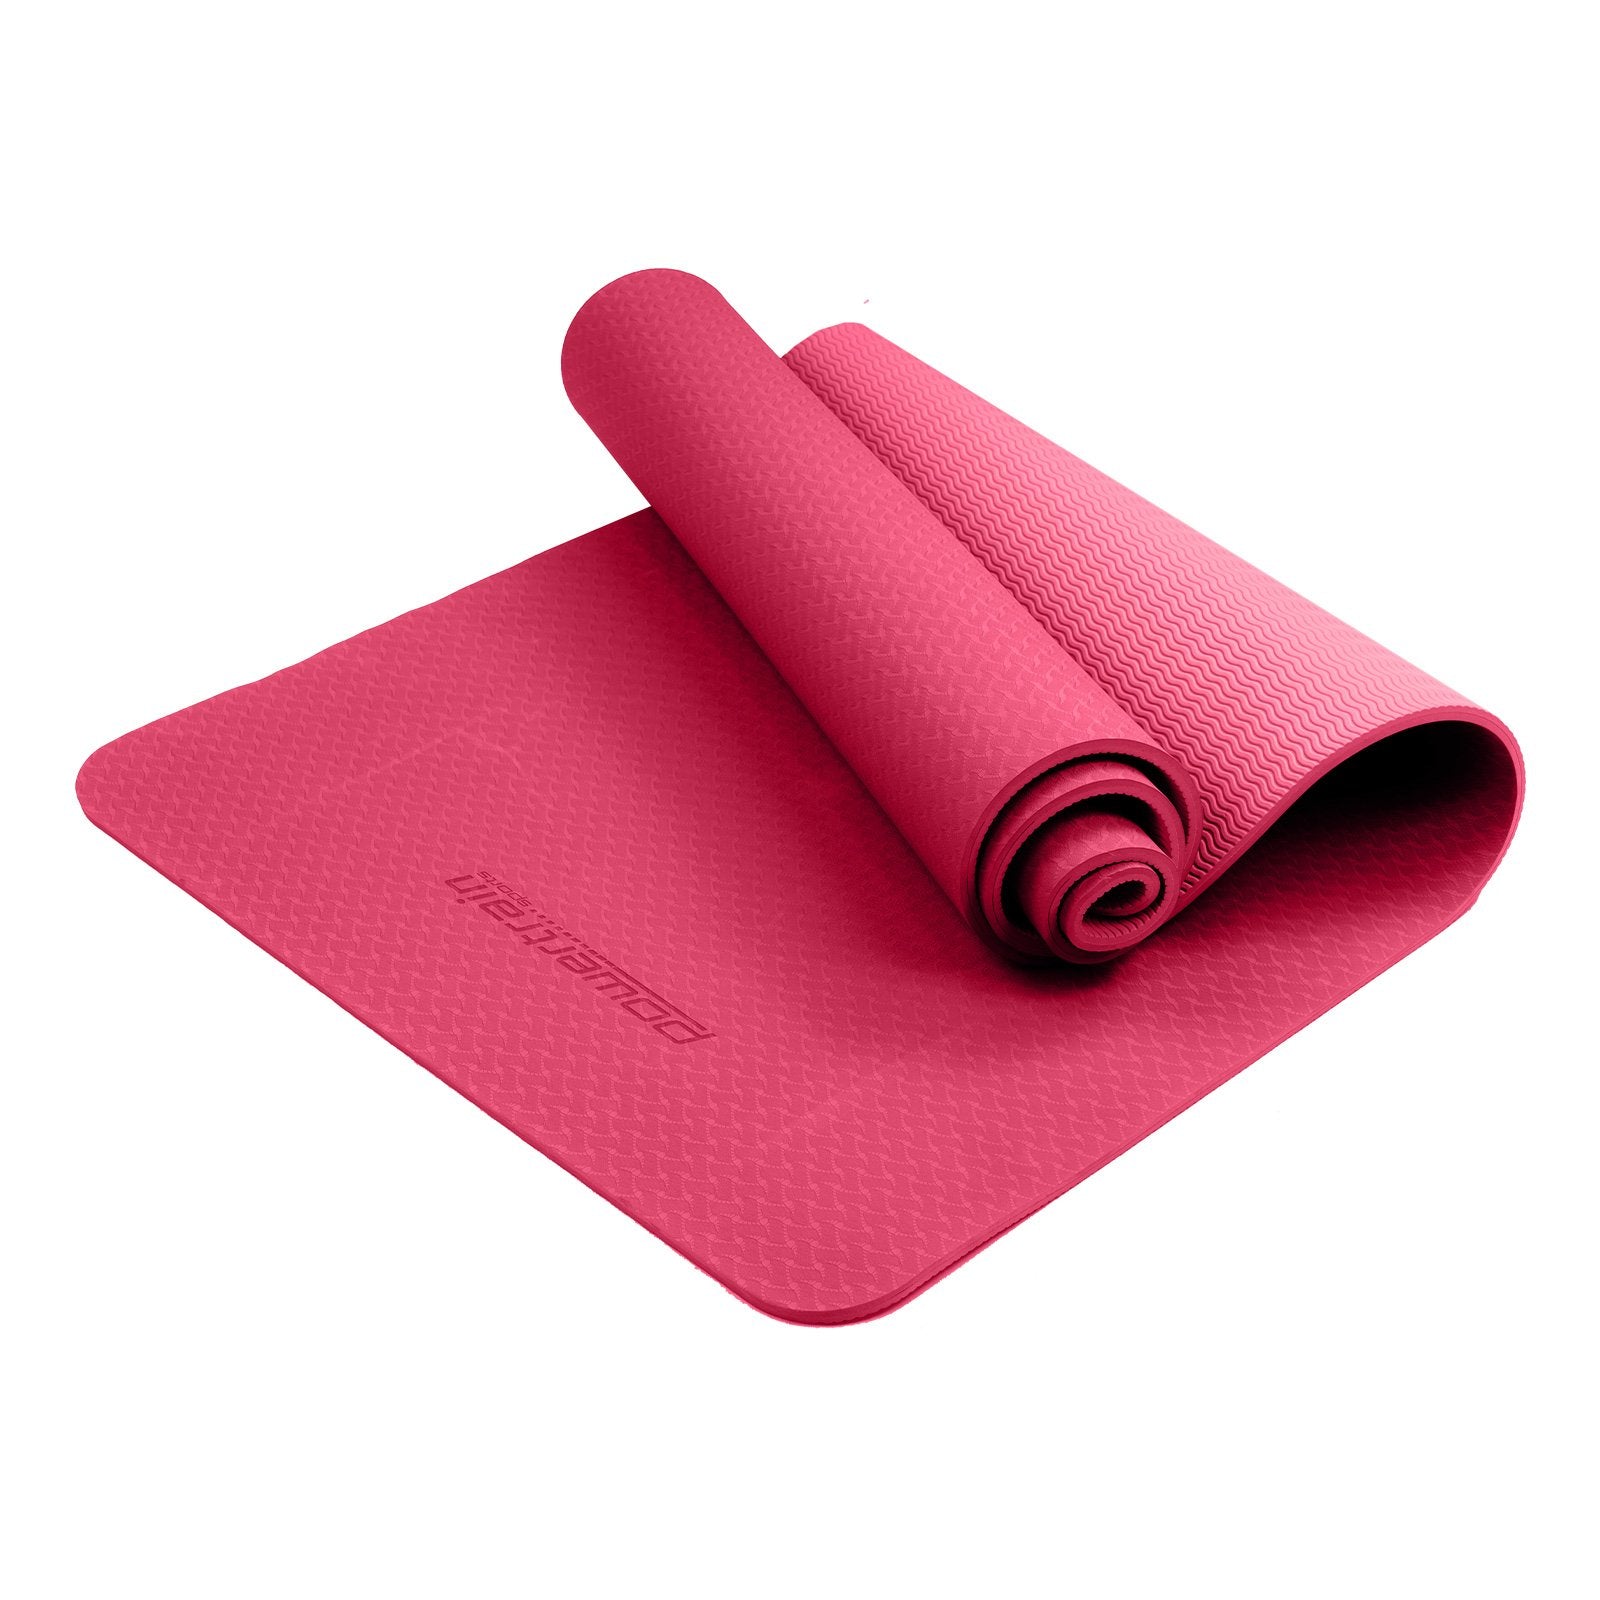 Eco-friendly Dual Layer 6mm Yoga Mat | Pink | Non-slip Surface And Carry Strap For Ultimate Comfort And Portability